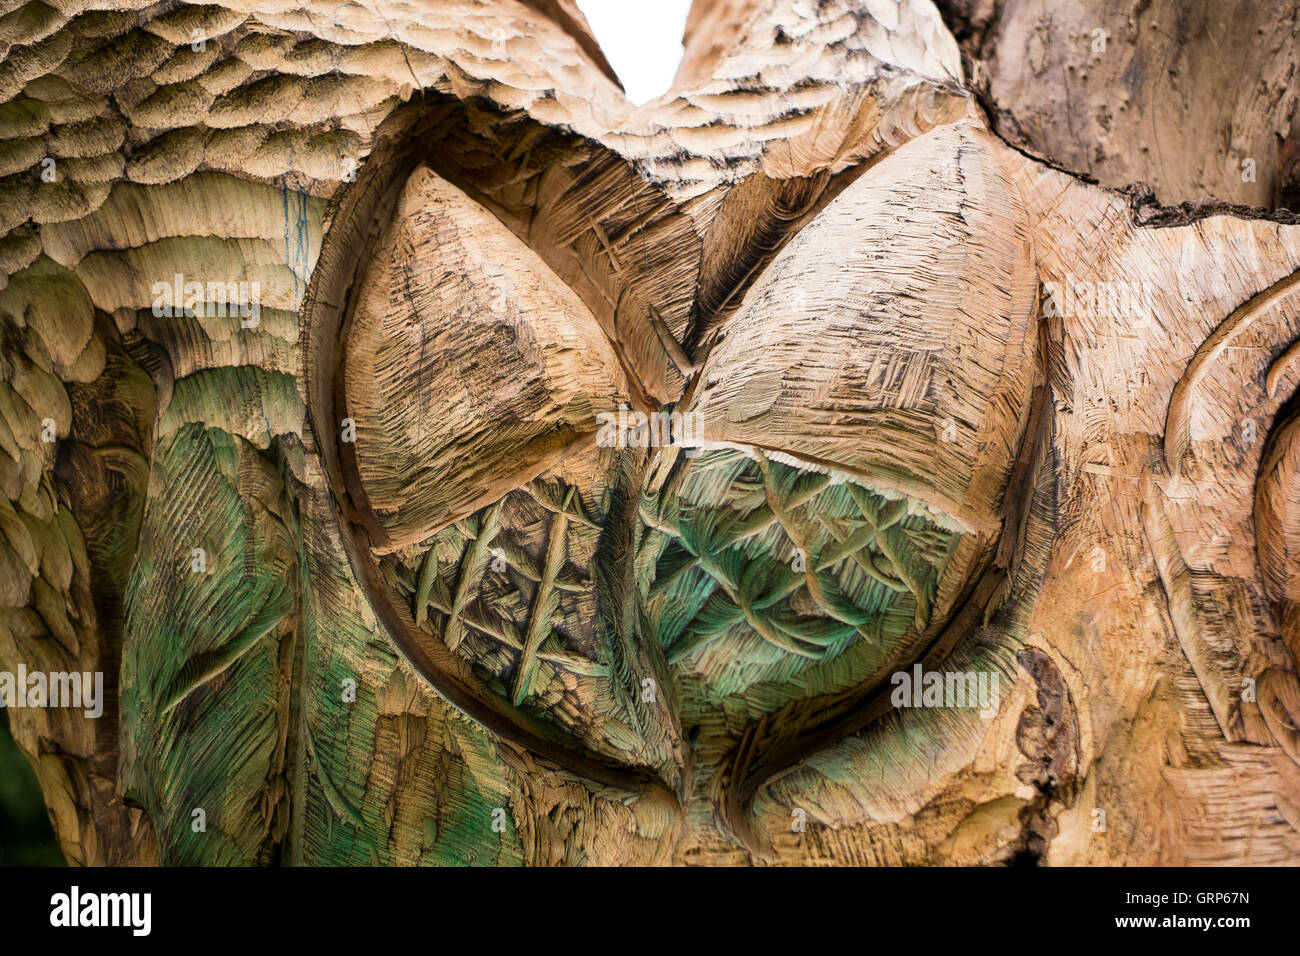 A wood carving created from a dead tree in the grounds of Castle Ashby House, Northamptonshire Stock Photo